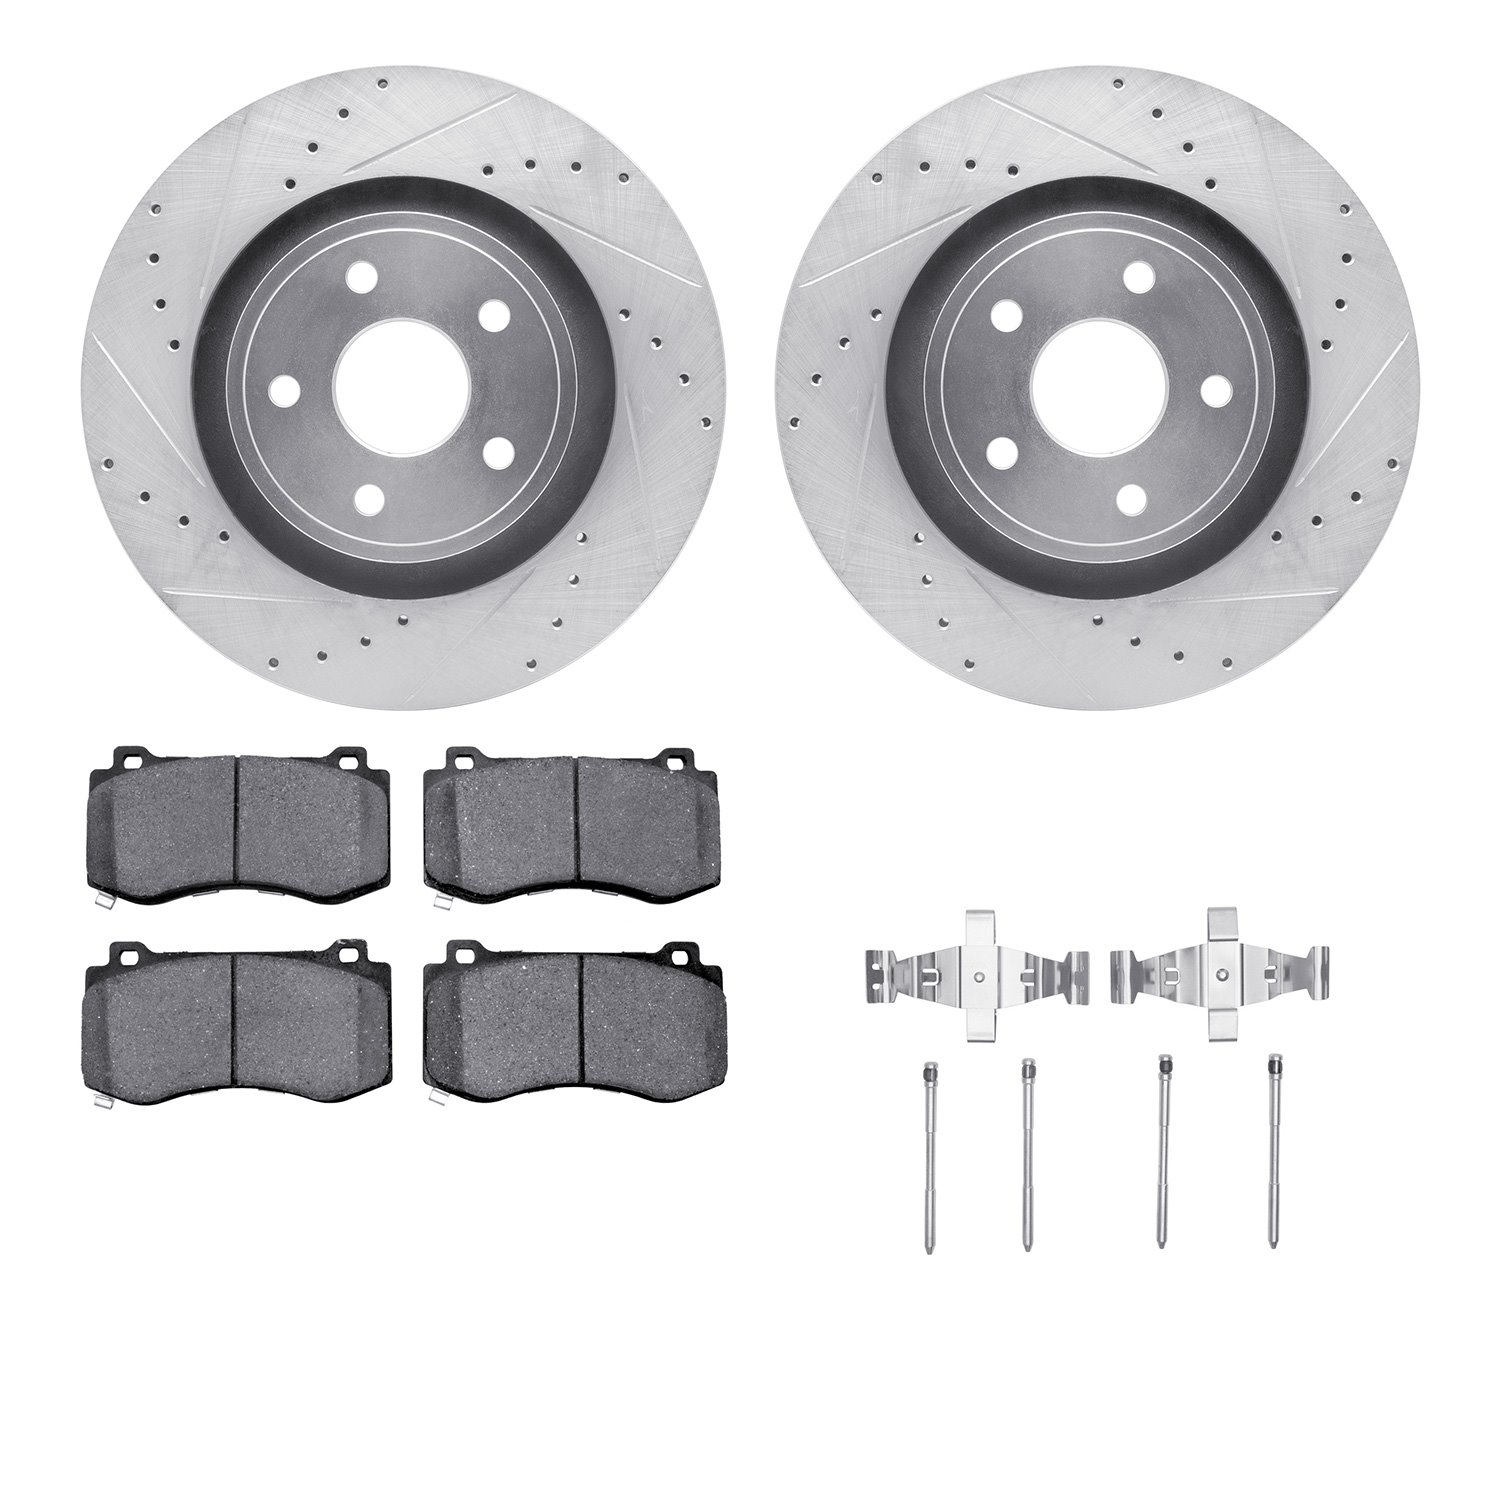 7412-42003 Drilled/Slotted Brake Rotors with Ultimate-Duty Brake Pads Kit & Hardware [Silver], 2006-2010 Mopar, Position: Front